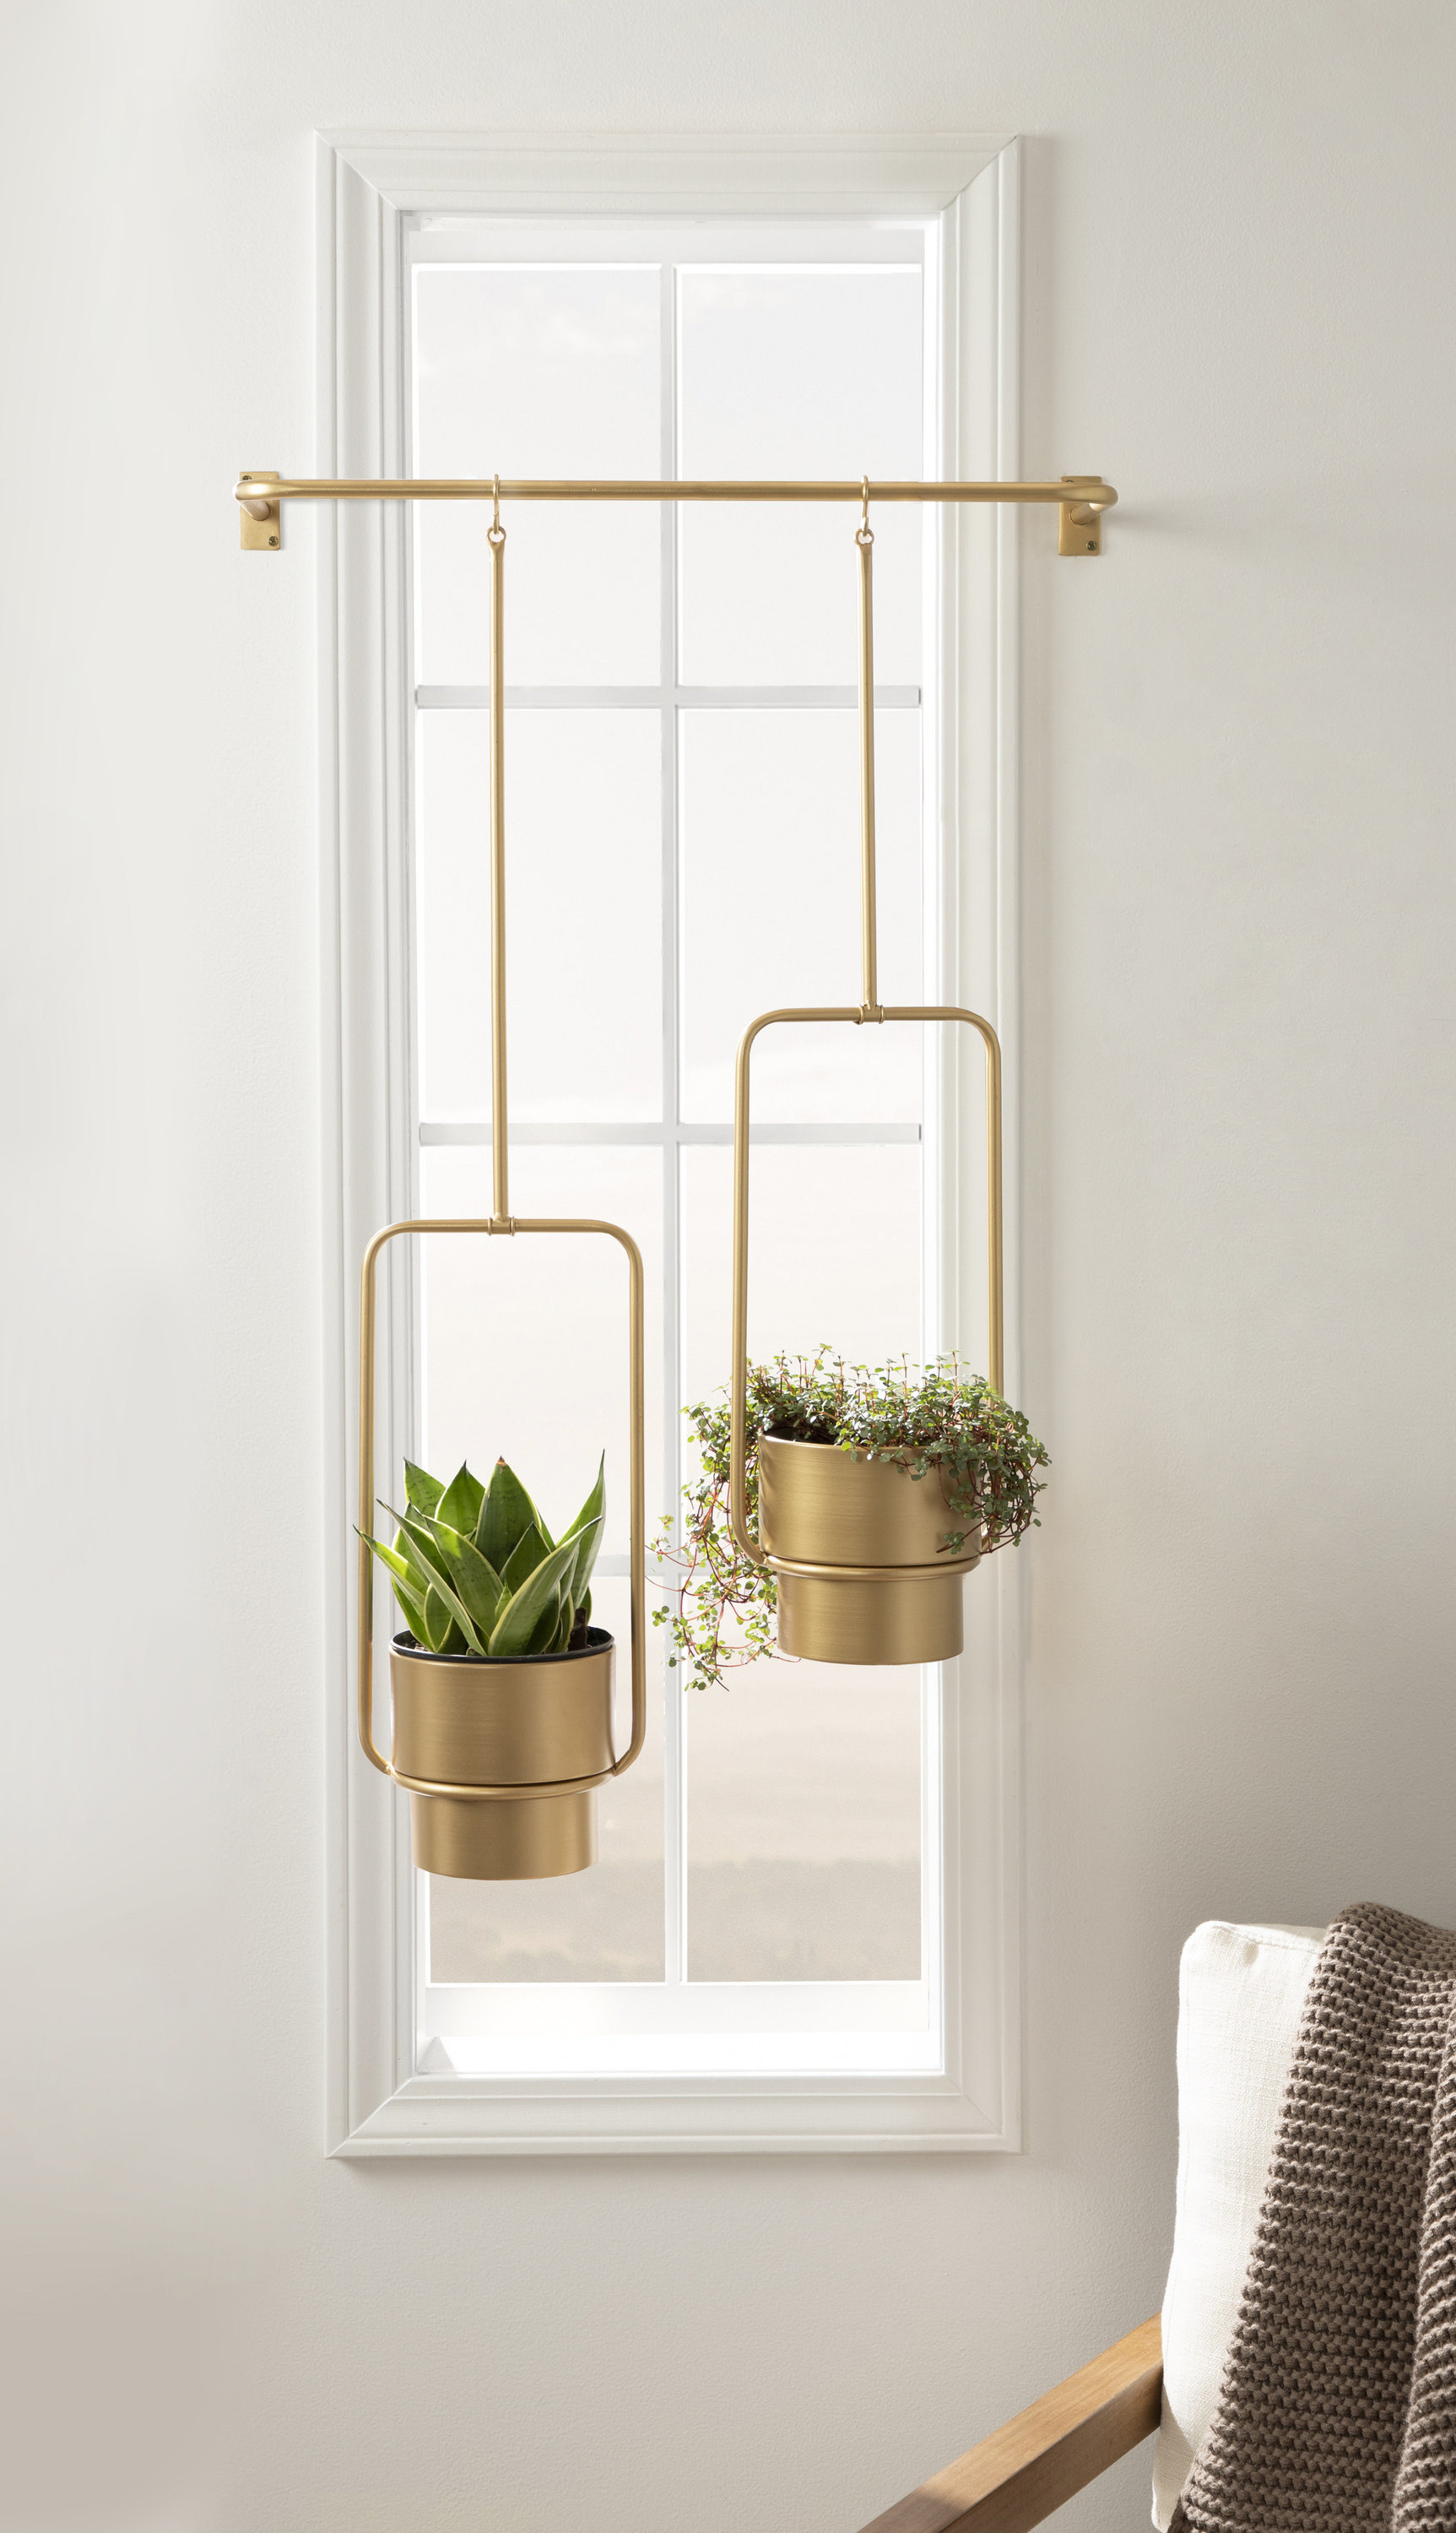 The planters hanging from a window